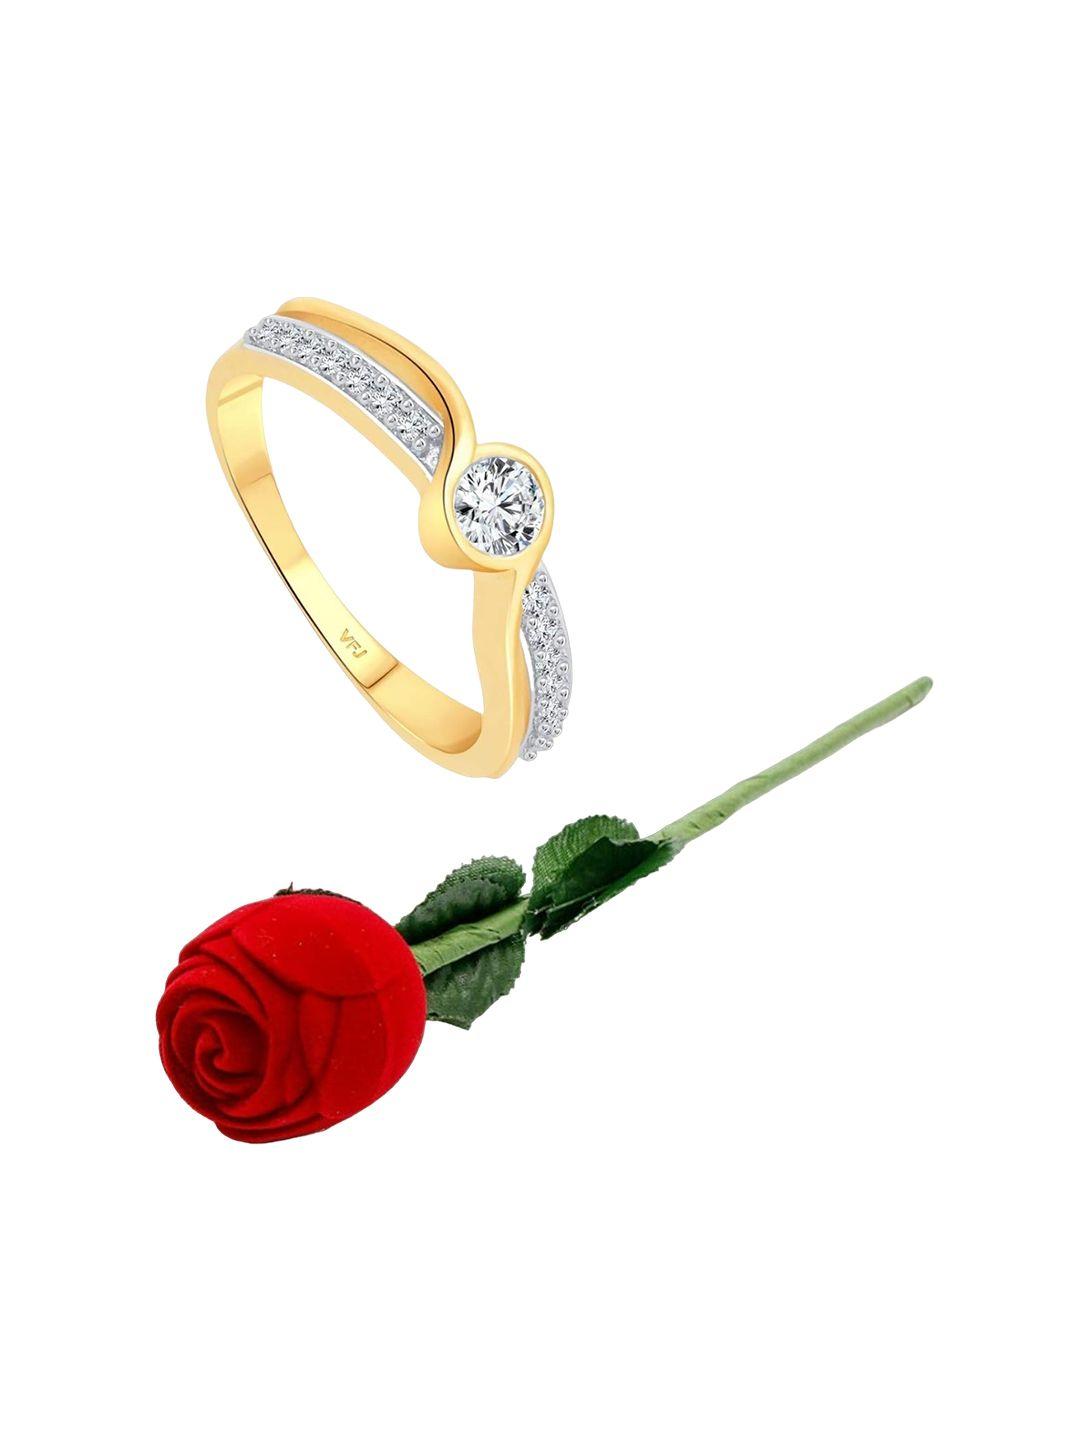 vighnaharta gold-plated cubic zirconia-stone studded solitaire finger ring with rose box